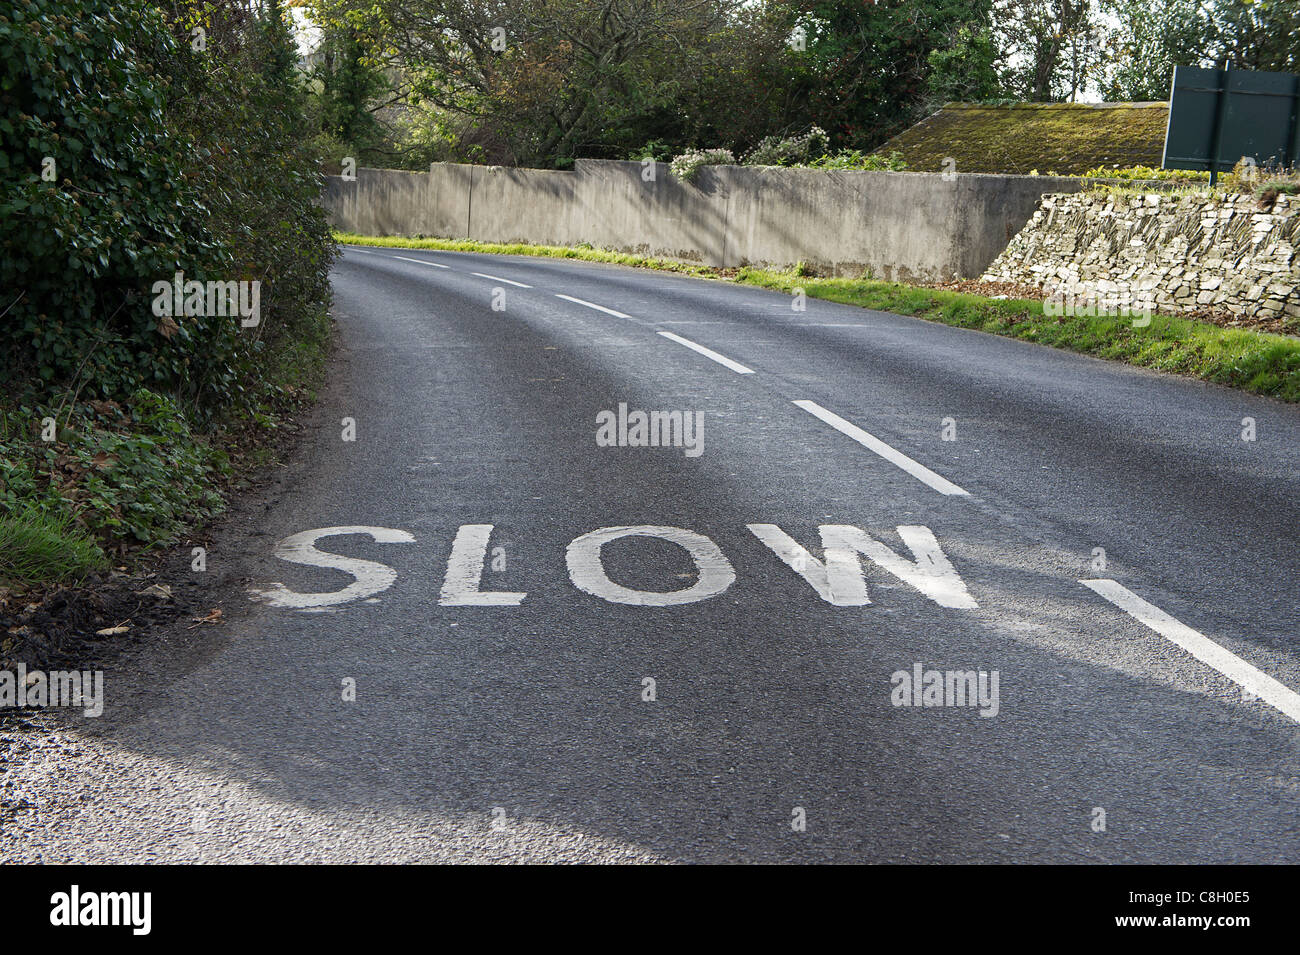 a slow sign painted in the road near a bend, uk Stock Photo